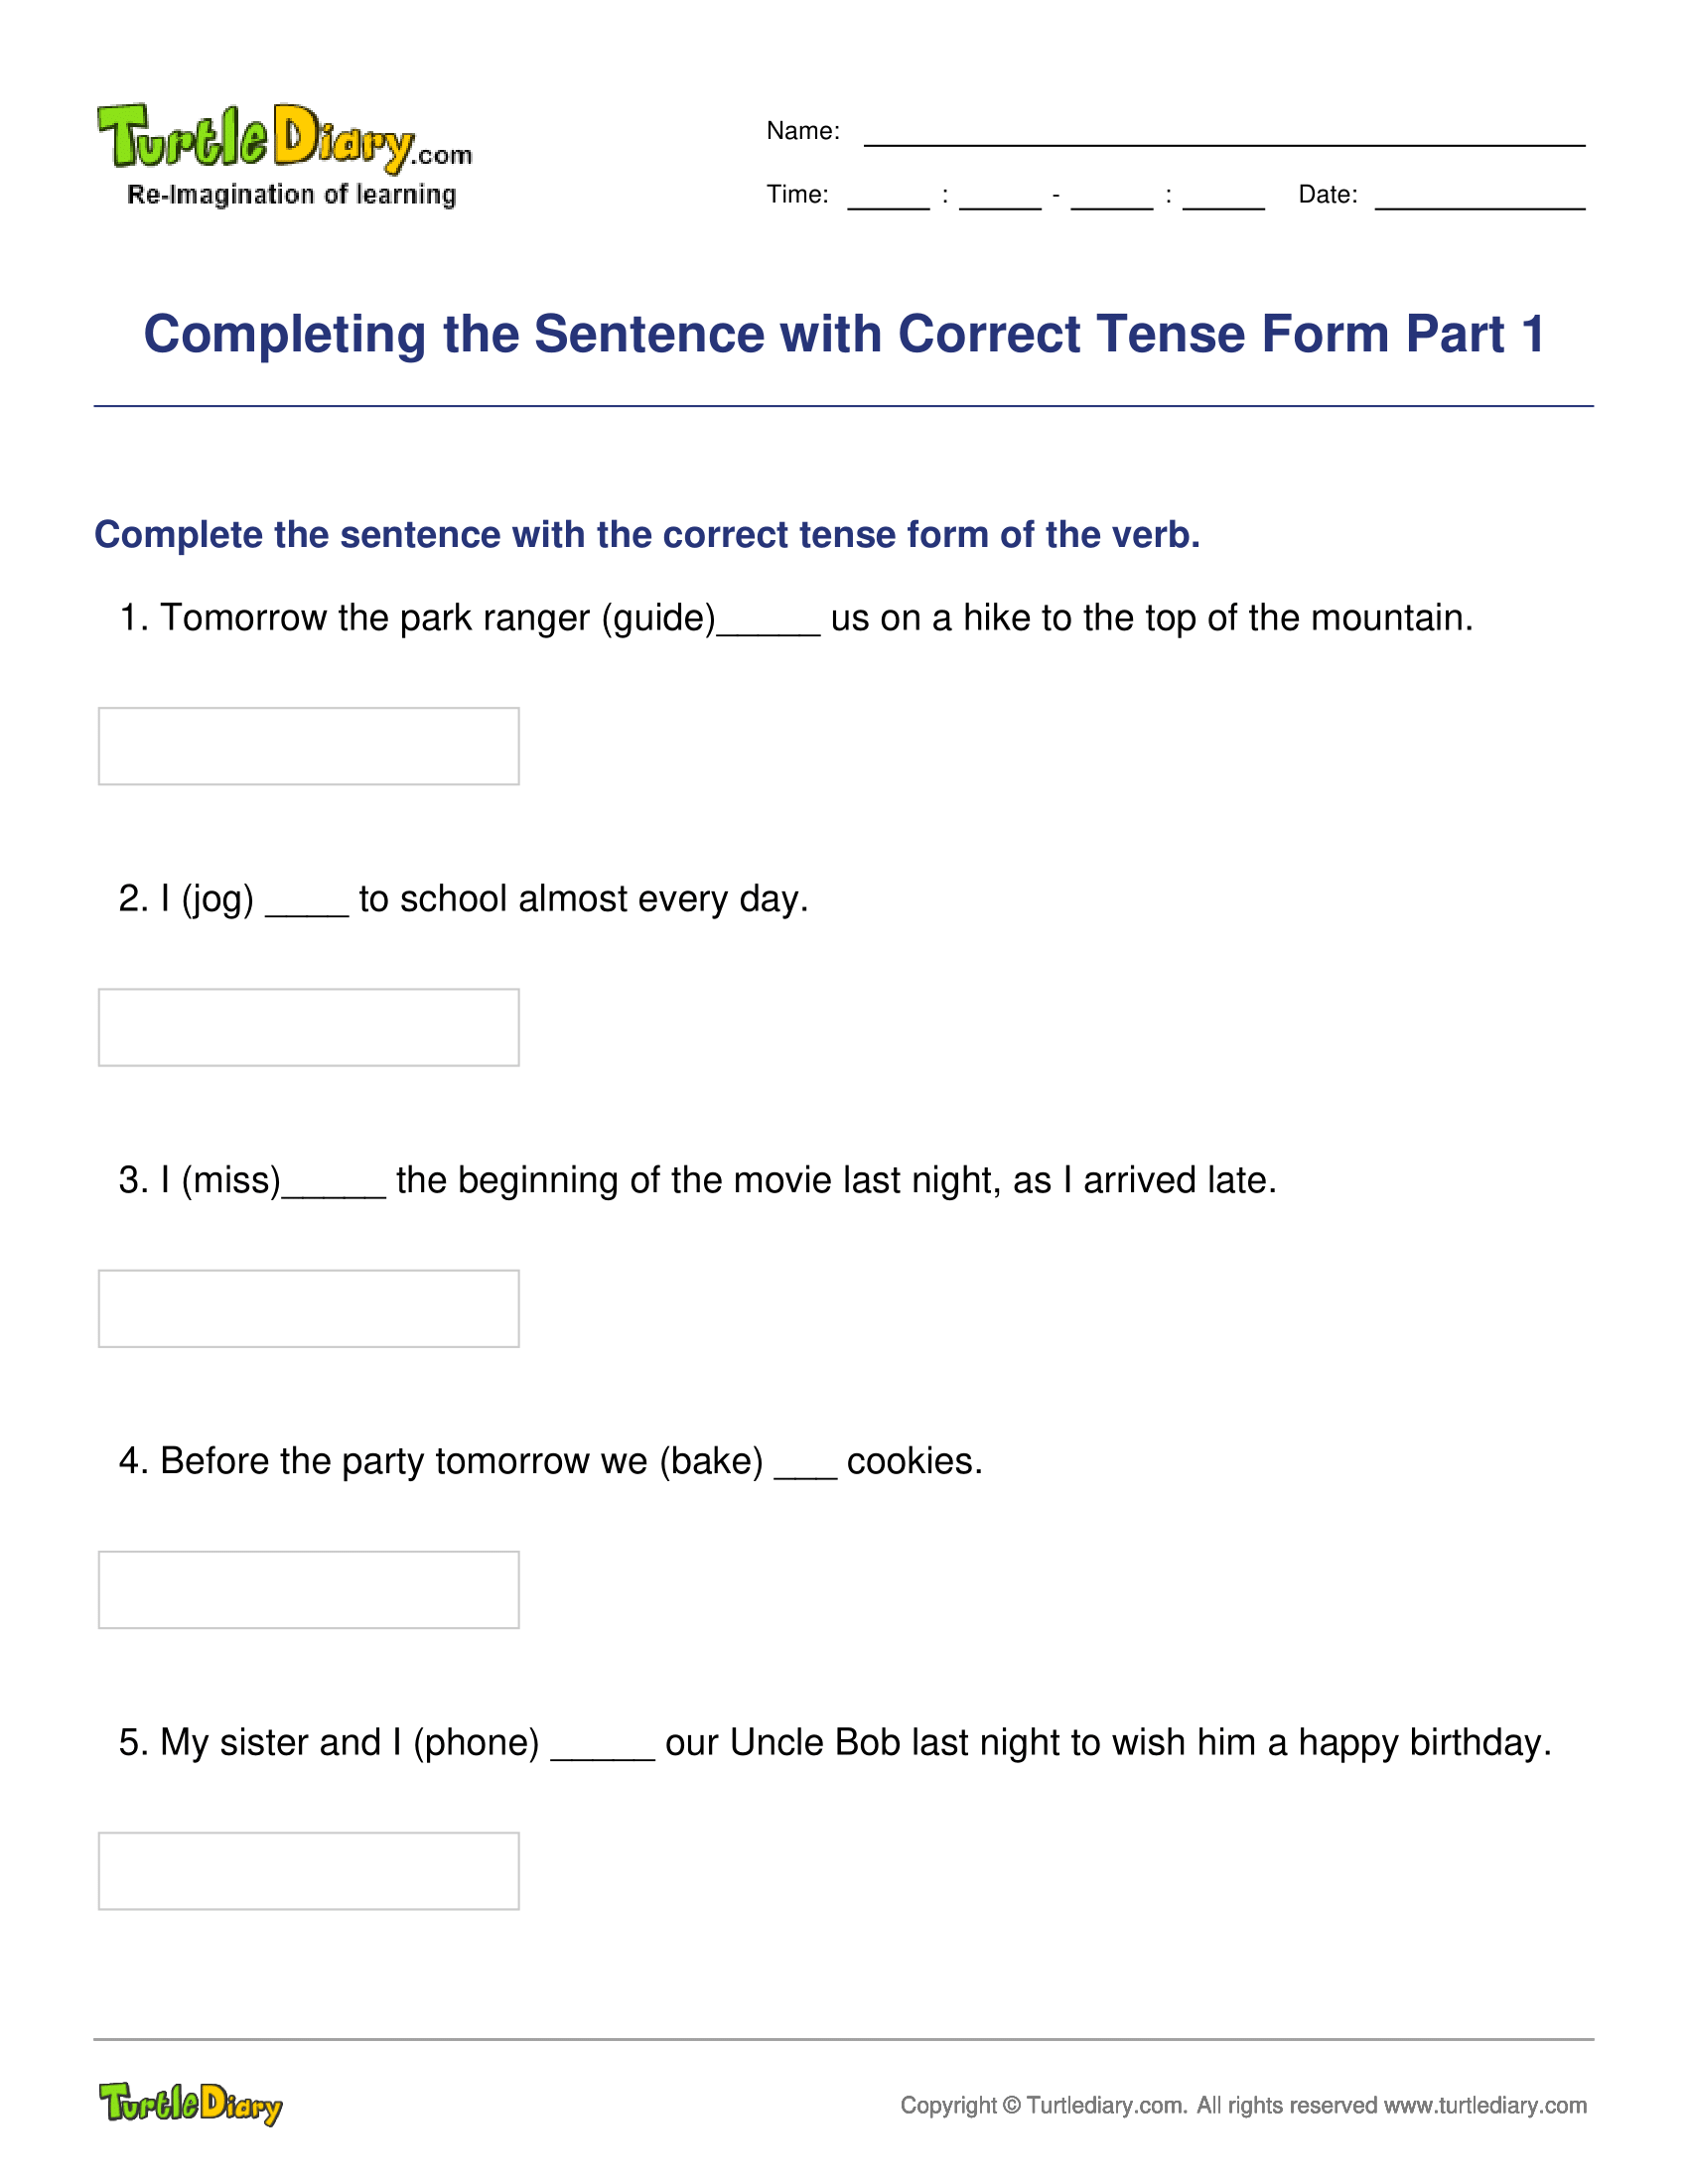 Completing the Sentence with Correct Tense Form Part 1